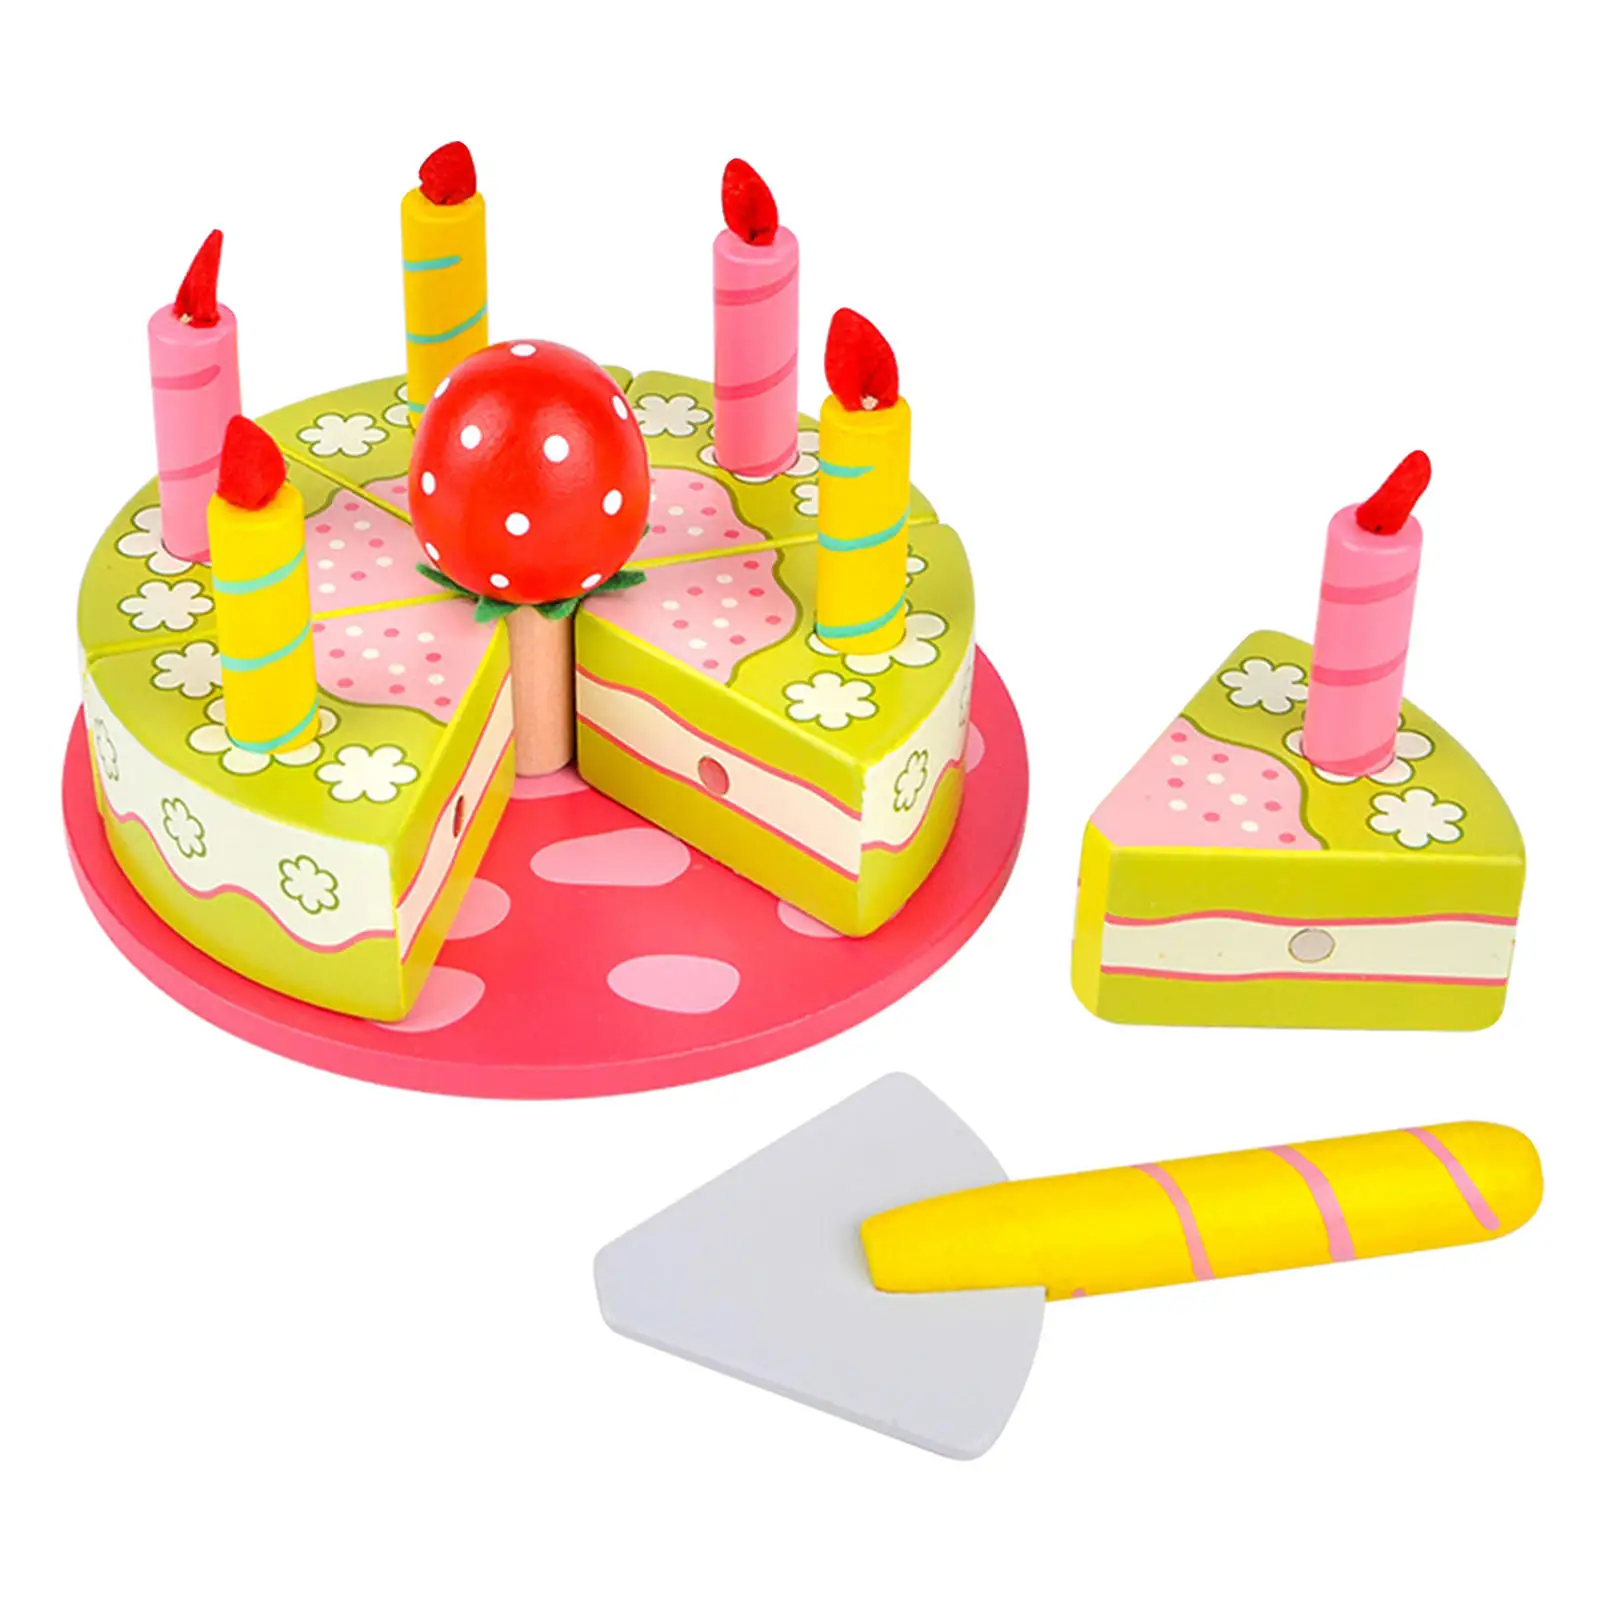 Cut Fruit Toy Cut Cut Music Magnetic Fruit Cake Wooden Children Girl Play House Birthday Cake